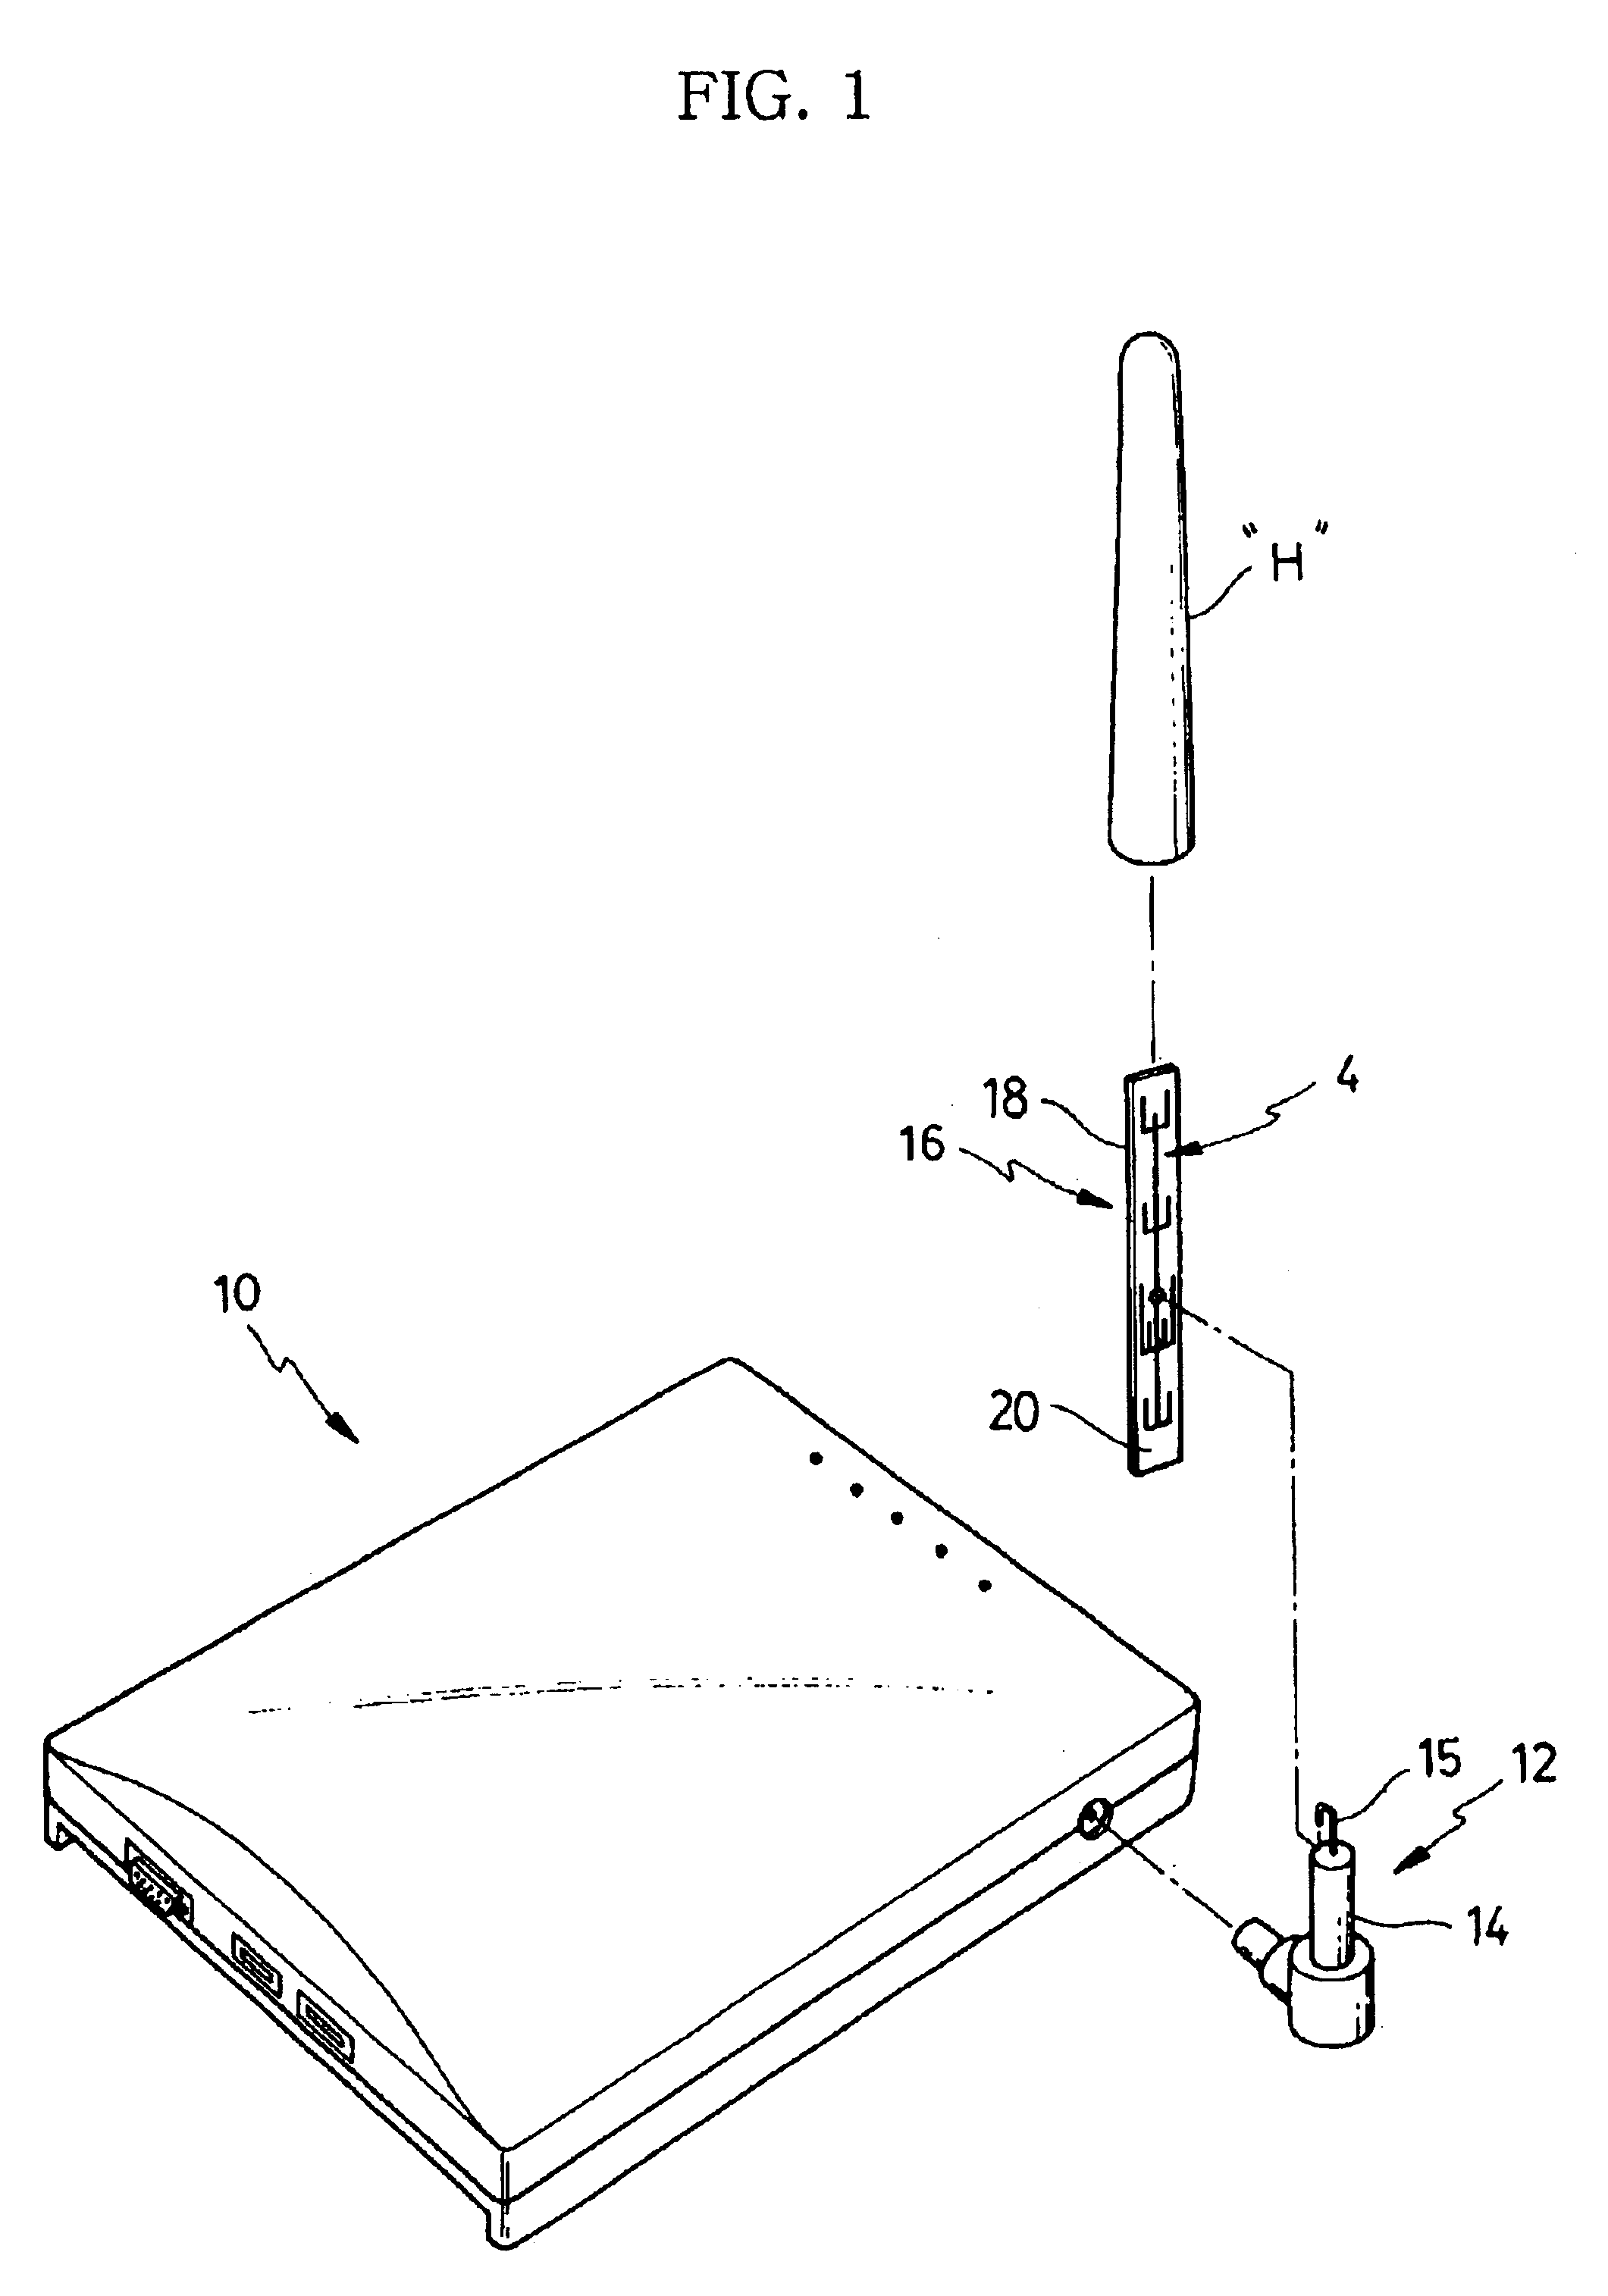 Dual-band omnidirectional antenna for wireless local area network